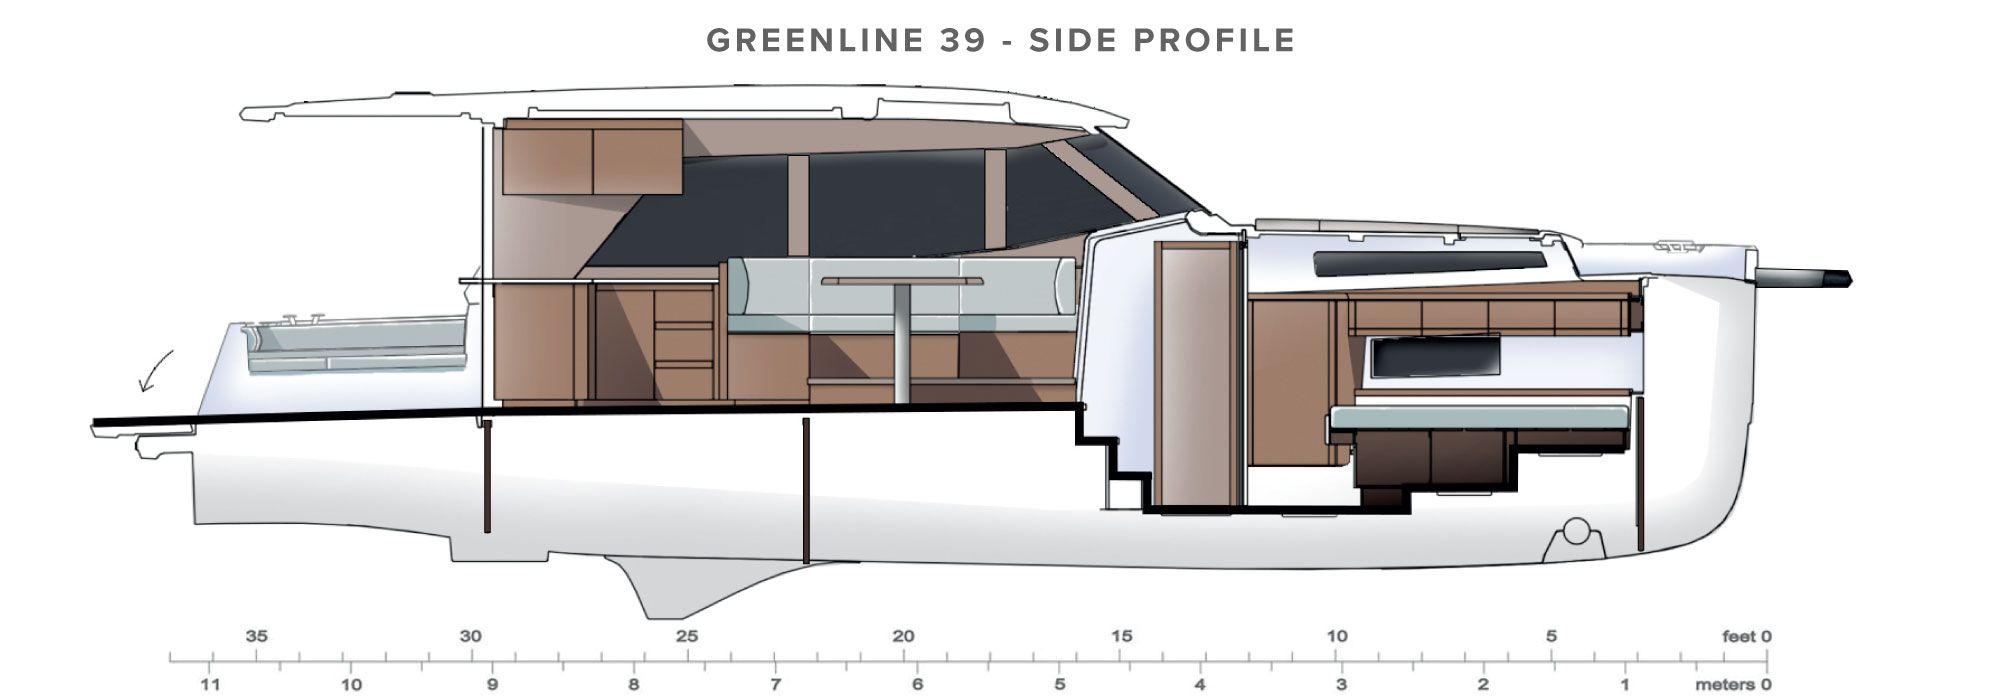 Greenline 39 Gallery Image